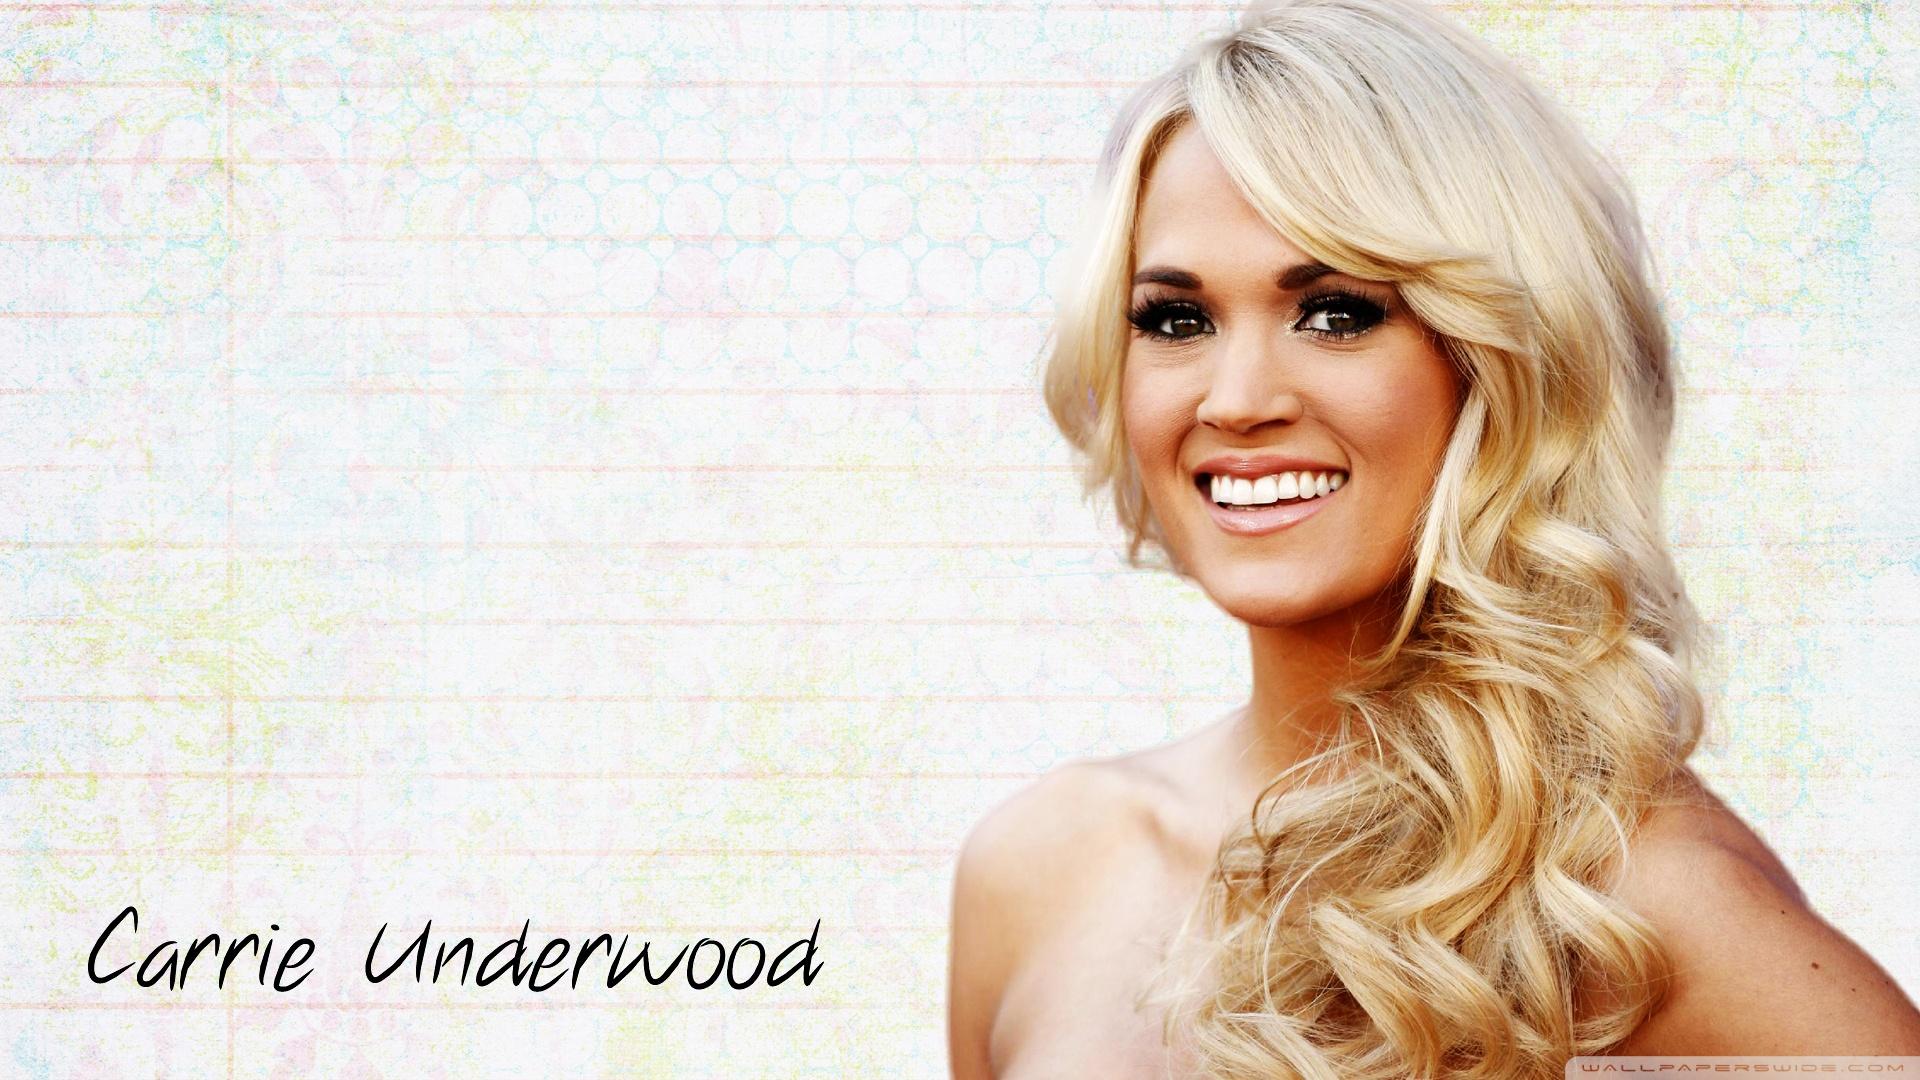 Adorable cool background of Carrie Underwood Wallpaper